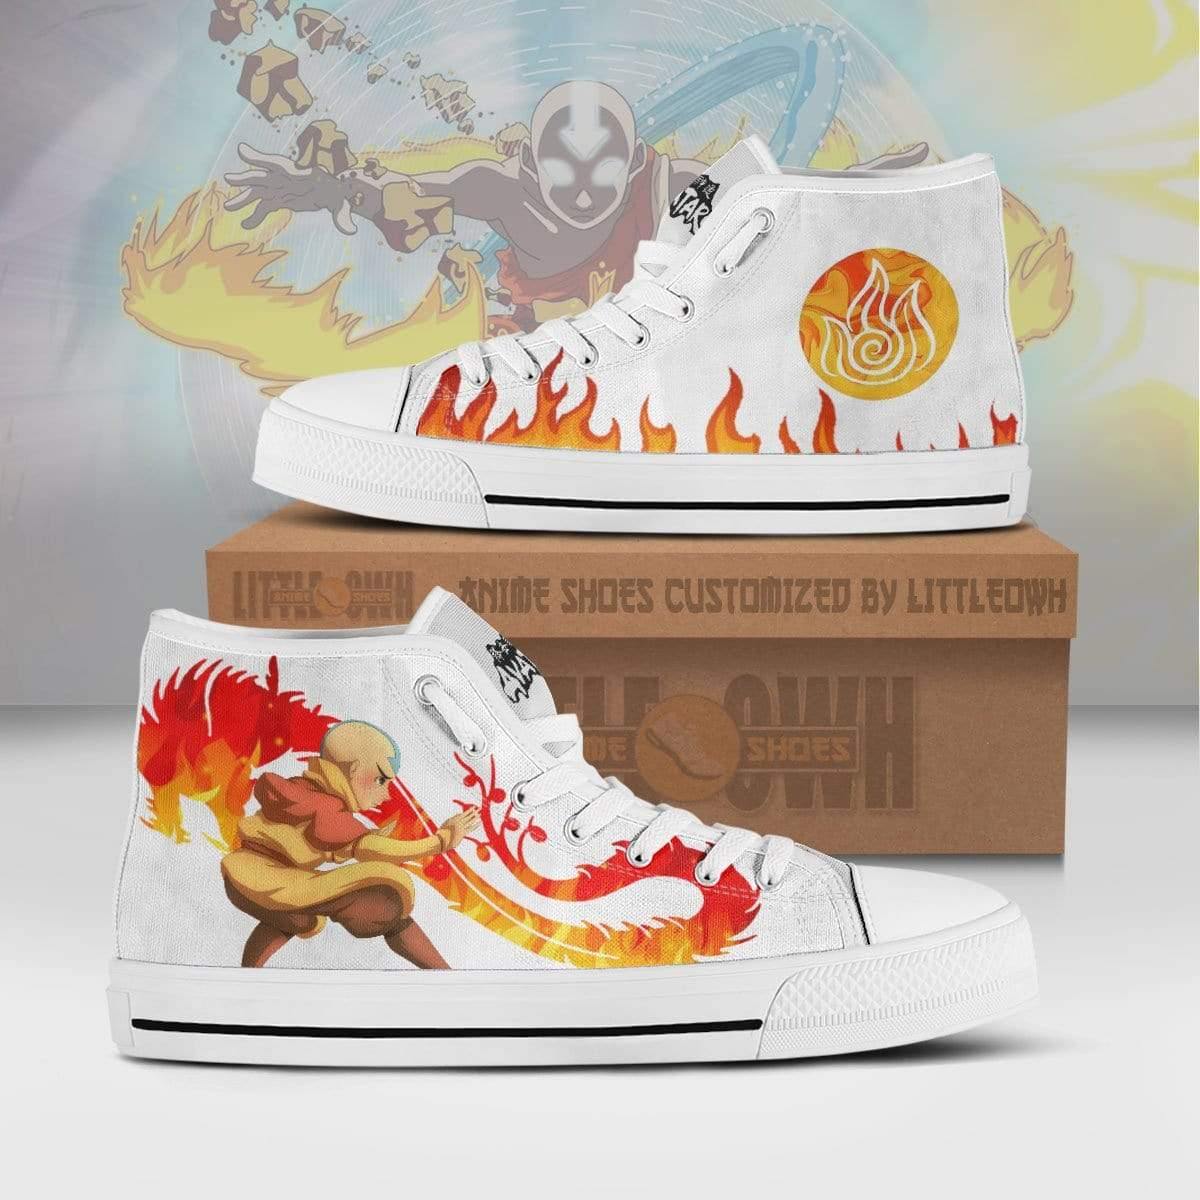 Aang High Top Canvas Shoes Custom Firebending Avatar: The Last Airbender Anime Sneakers